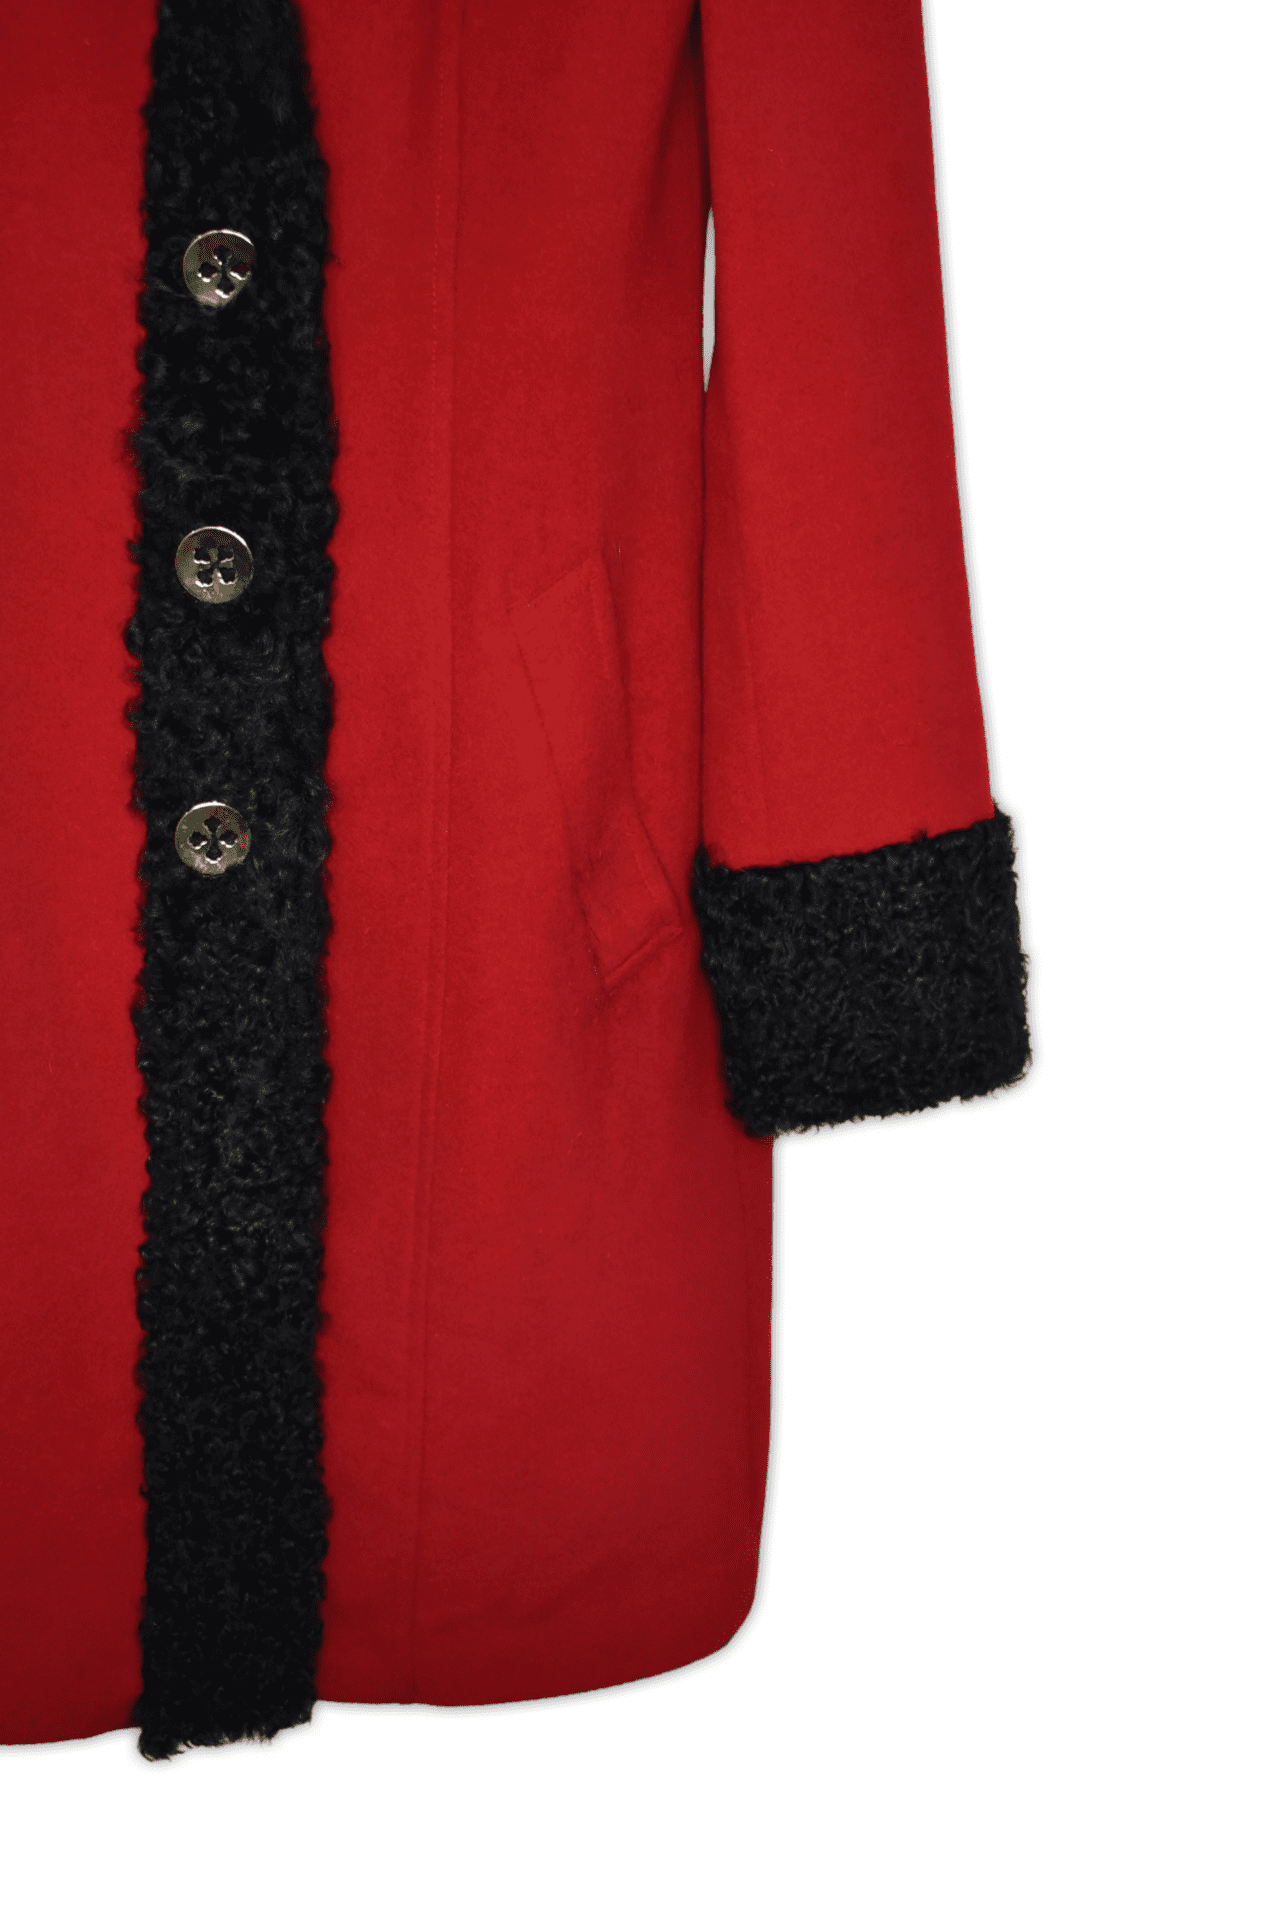 Small, wool, red coat. Cosy wool coat featuring two front patch pockets, gold buttons, and black wool trim around the collar, button wrap and cuffs.